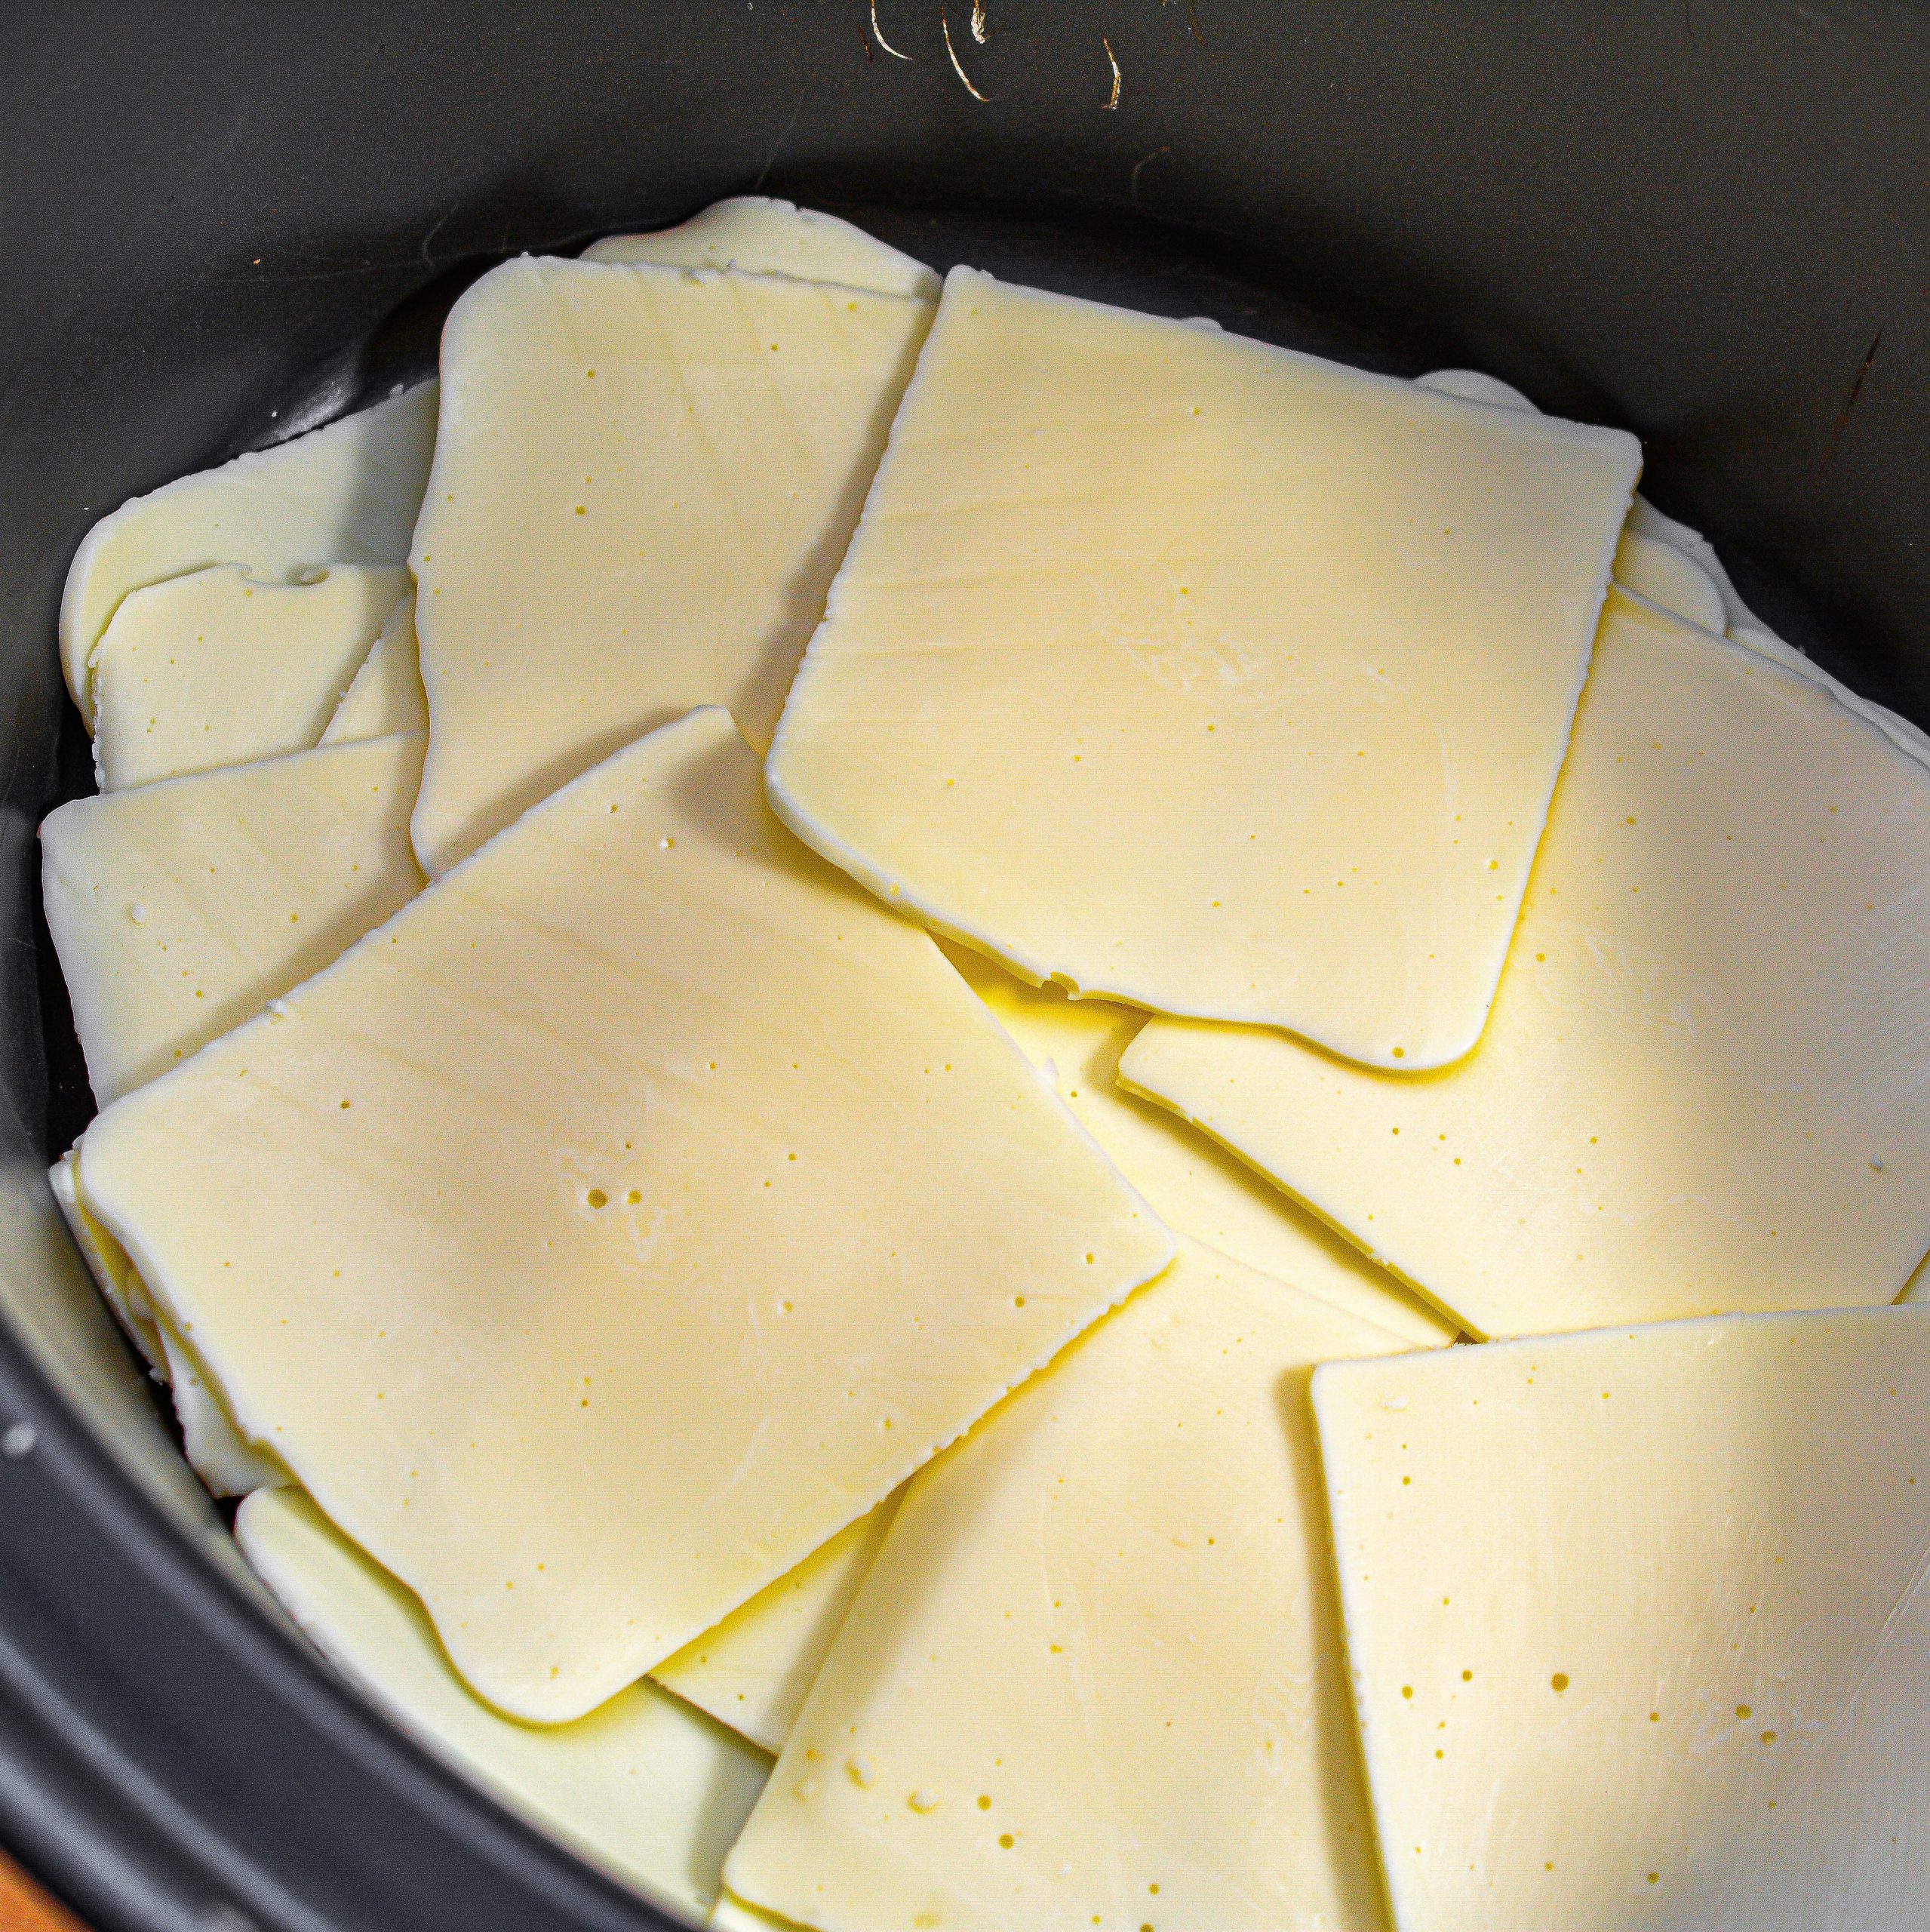 Layer the cheese slices in the bottom of a slow cooker.